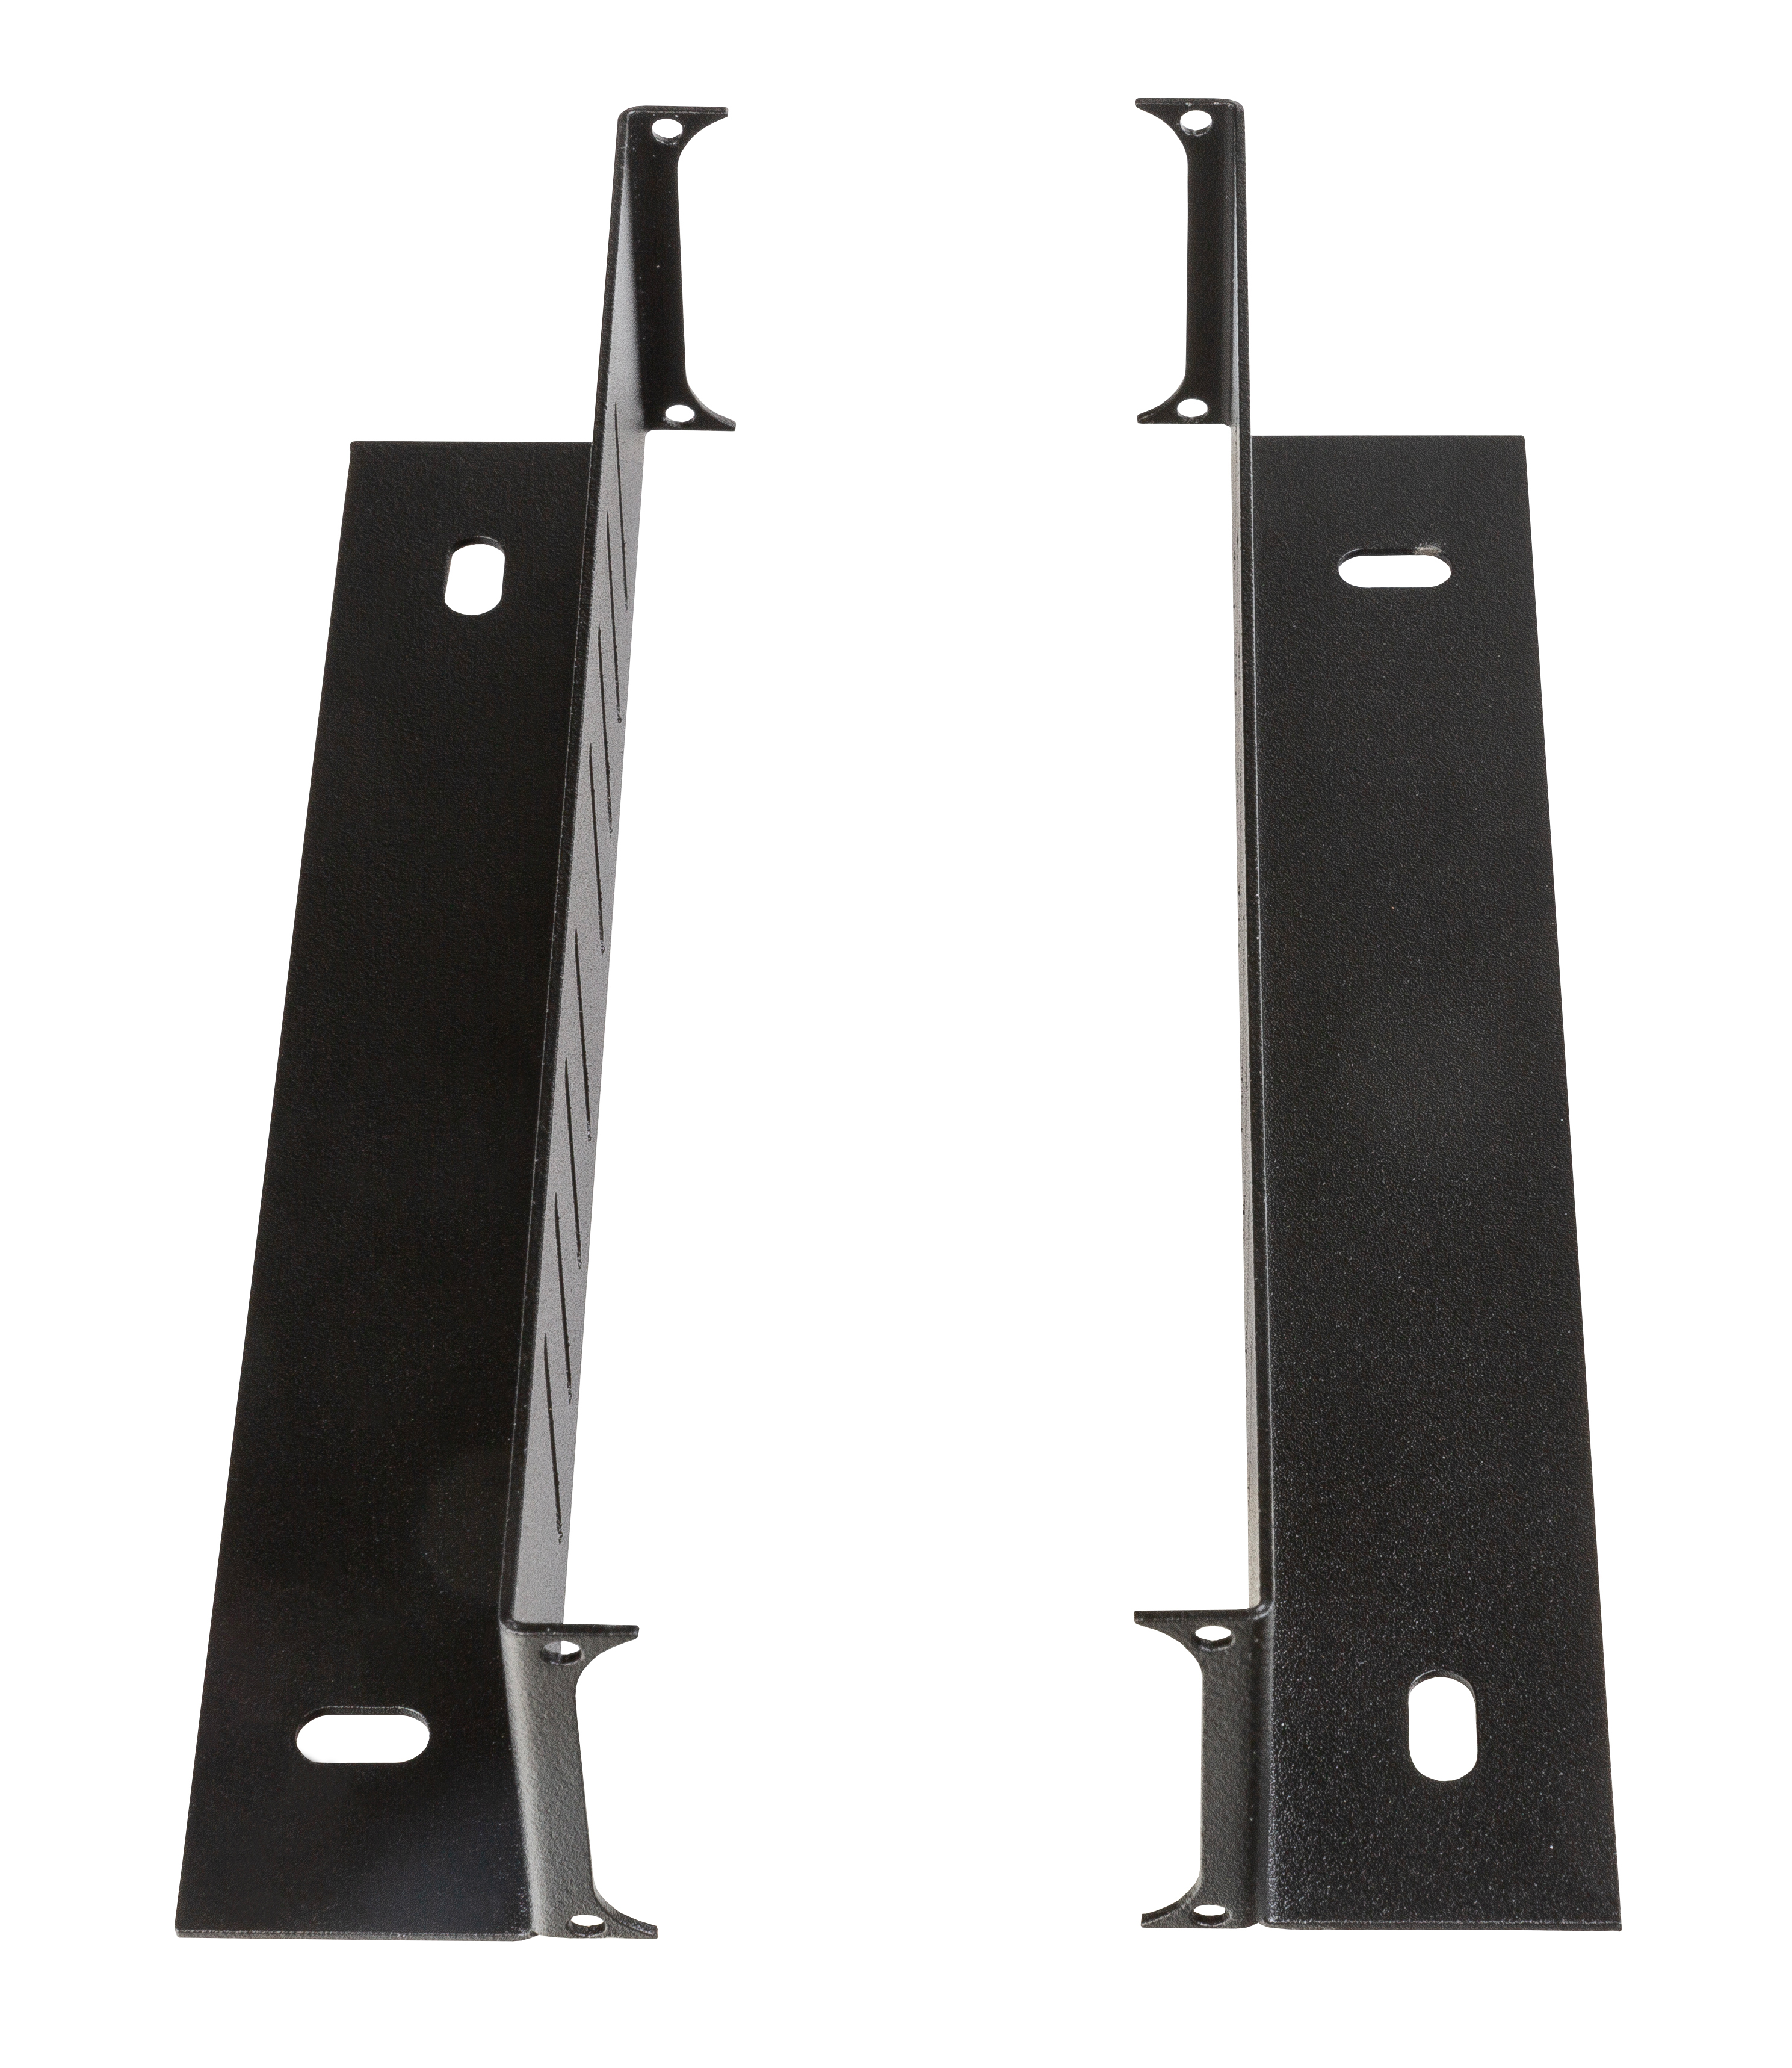 Optional mounting bracket to mount certain Briteq / Synq units under a desk or against a wall